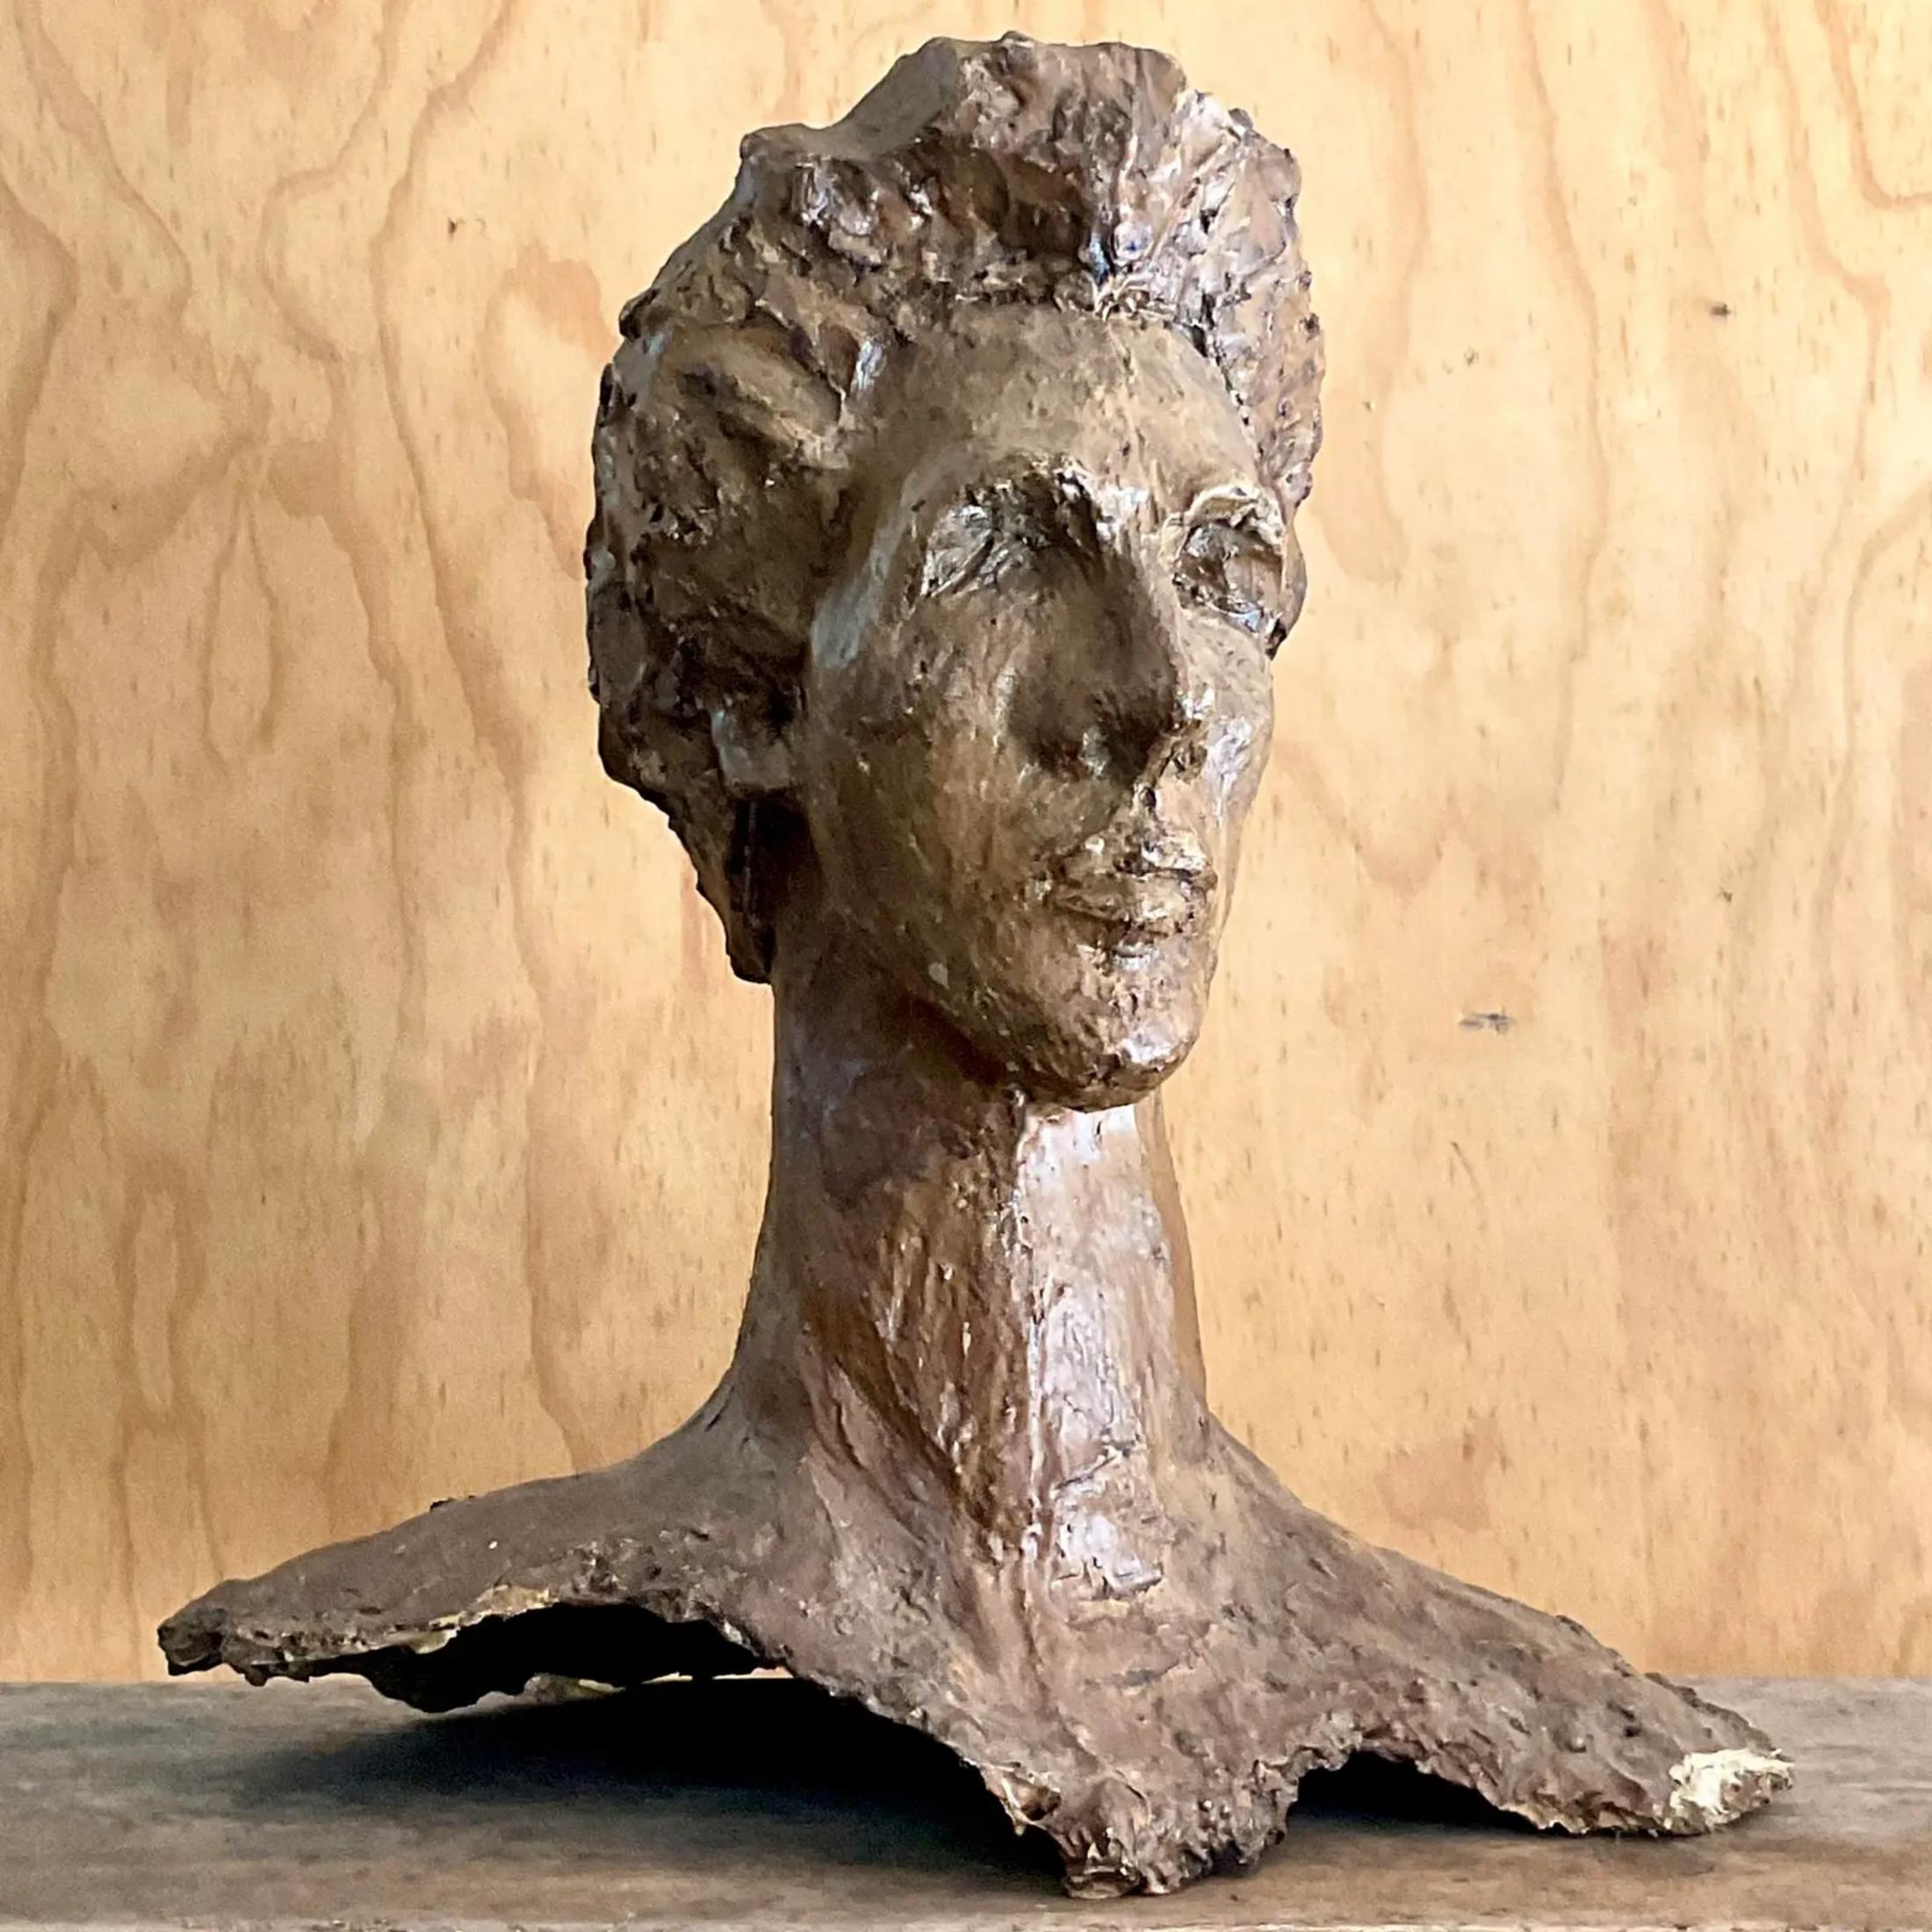 A fabulous vintage boho sculpture of man. A handsome bust of a gentleman with serious Hollywood hair. Plaster over fiberglass with lots of great texture. Acquired from a Palm Beach estate. Unsigned less

